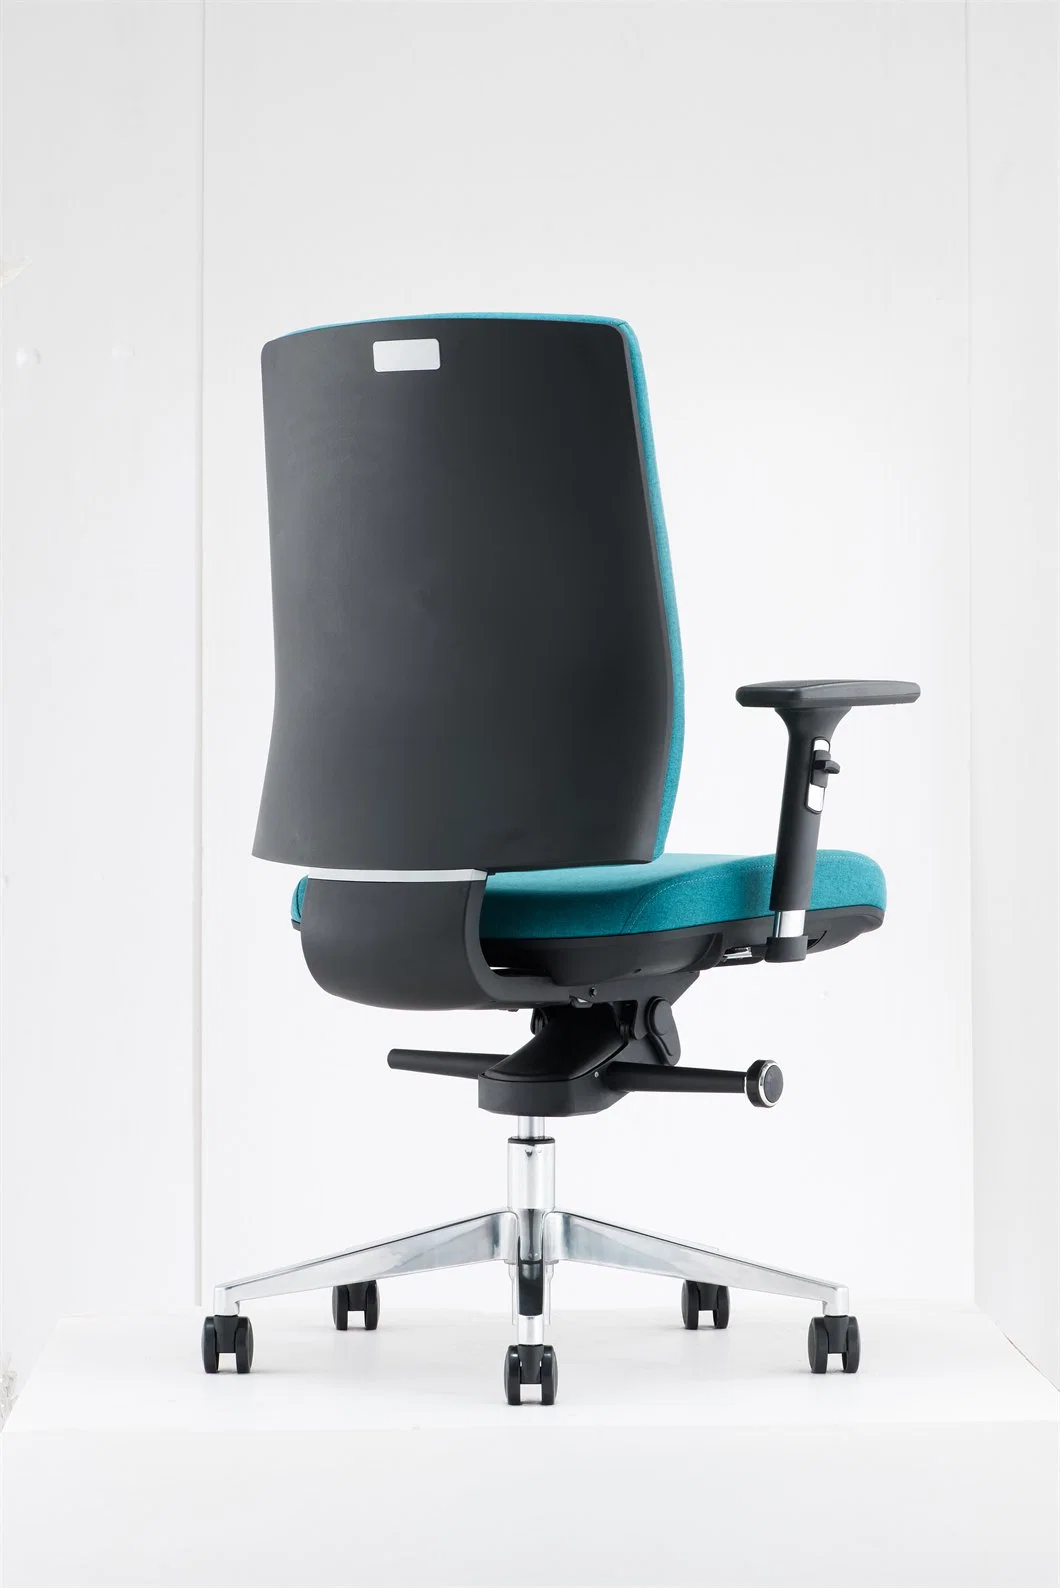 Manufacturer of Steel Airport Hospital Chair Waiting Room Chair Office Chairs Metal Seating Modern Home Furniture Chair